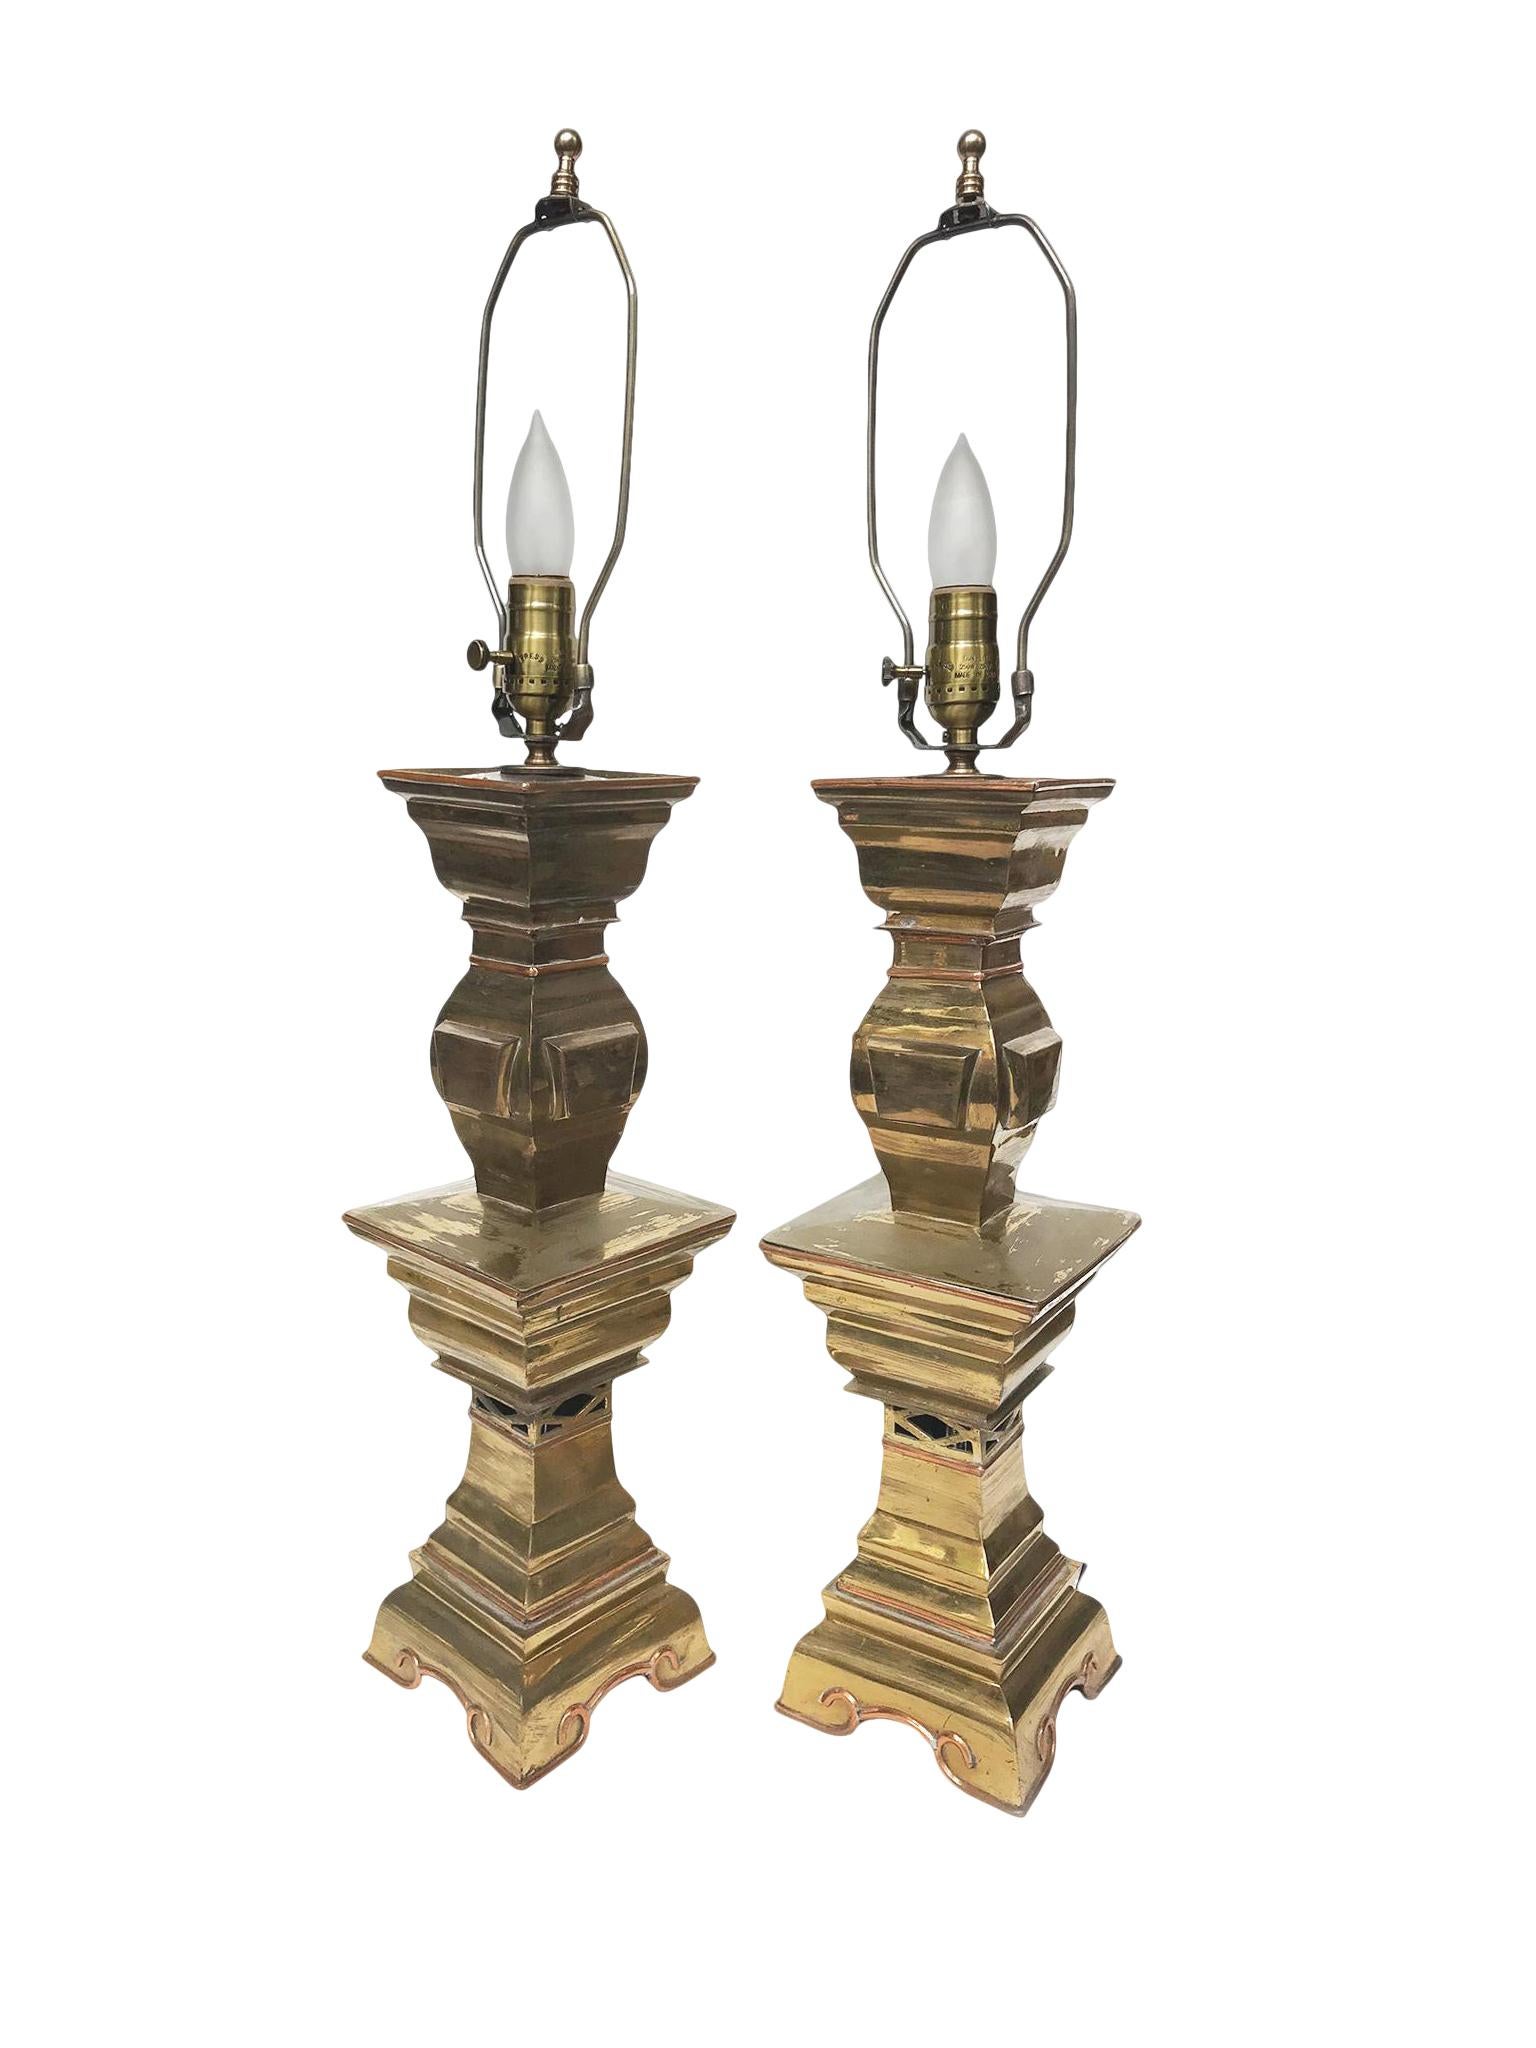 Pair of Mid-20th Century Brass Candlestick Lamps In Good Condition For Sale In New York, NY